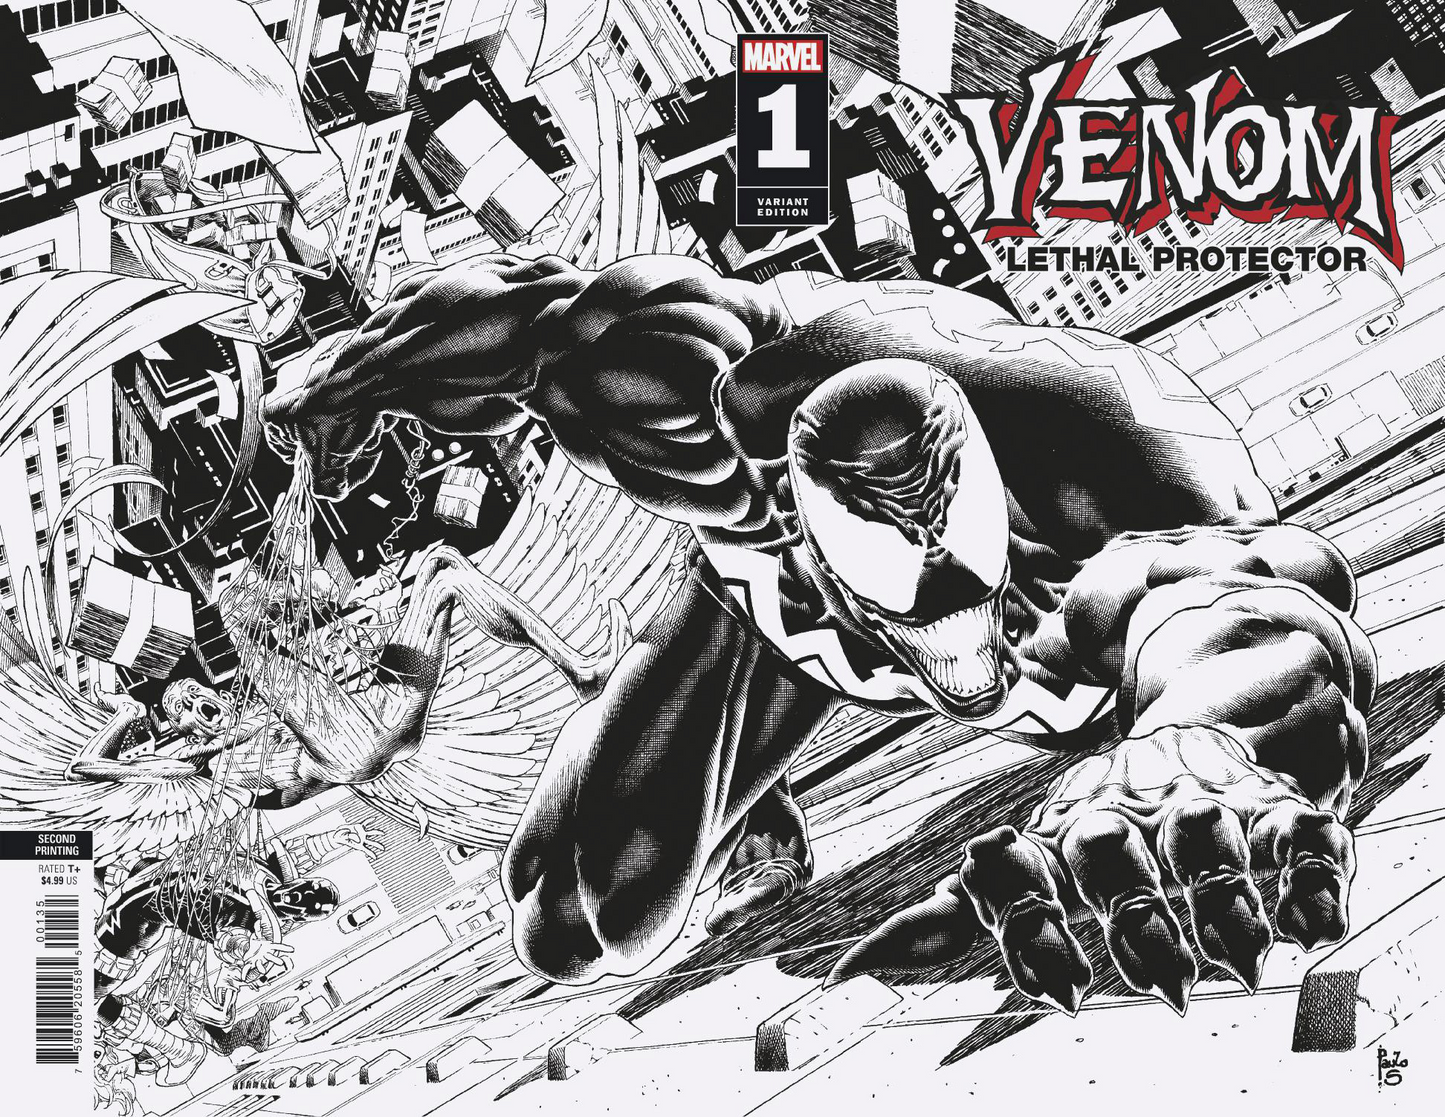 Venom Lethal Protector Ii #1 (Of 5) 2nd Print 1:25 Paulo Siqueira Variant (05/10/2023) Marvel